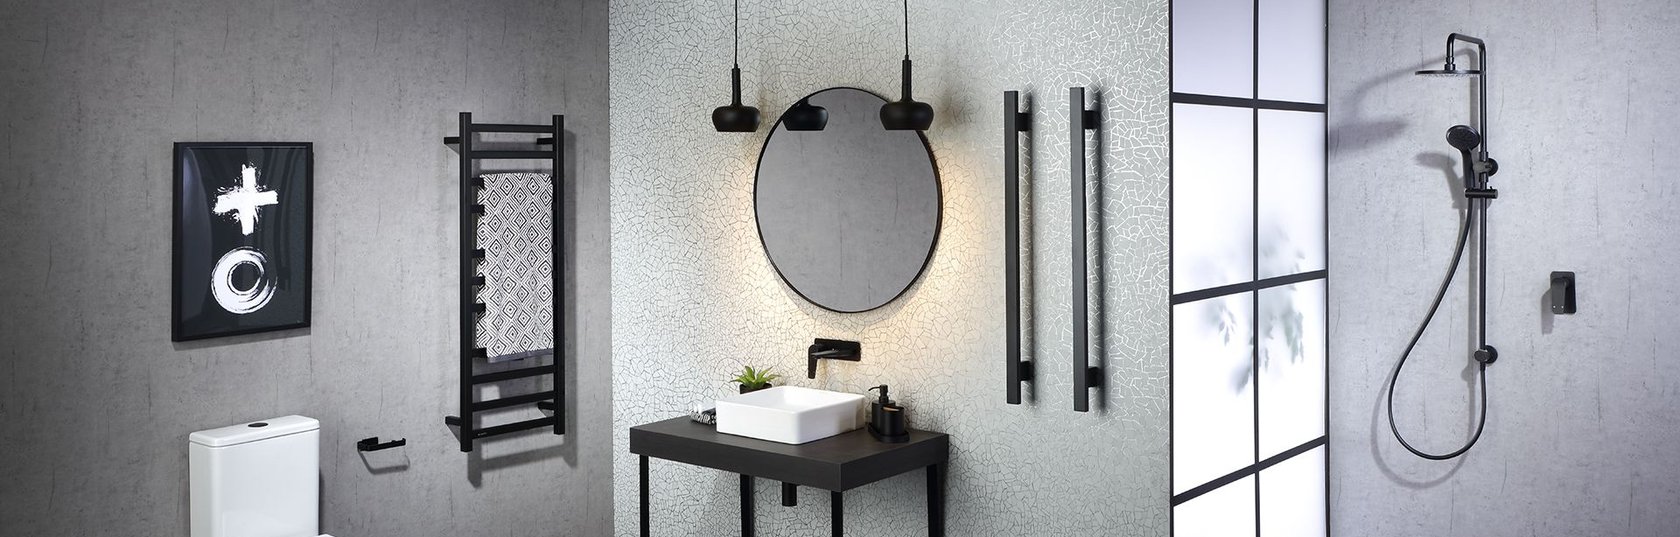 It's a match: new cohesive hardware and bathroom accessories